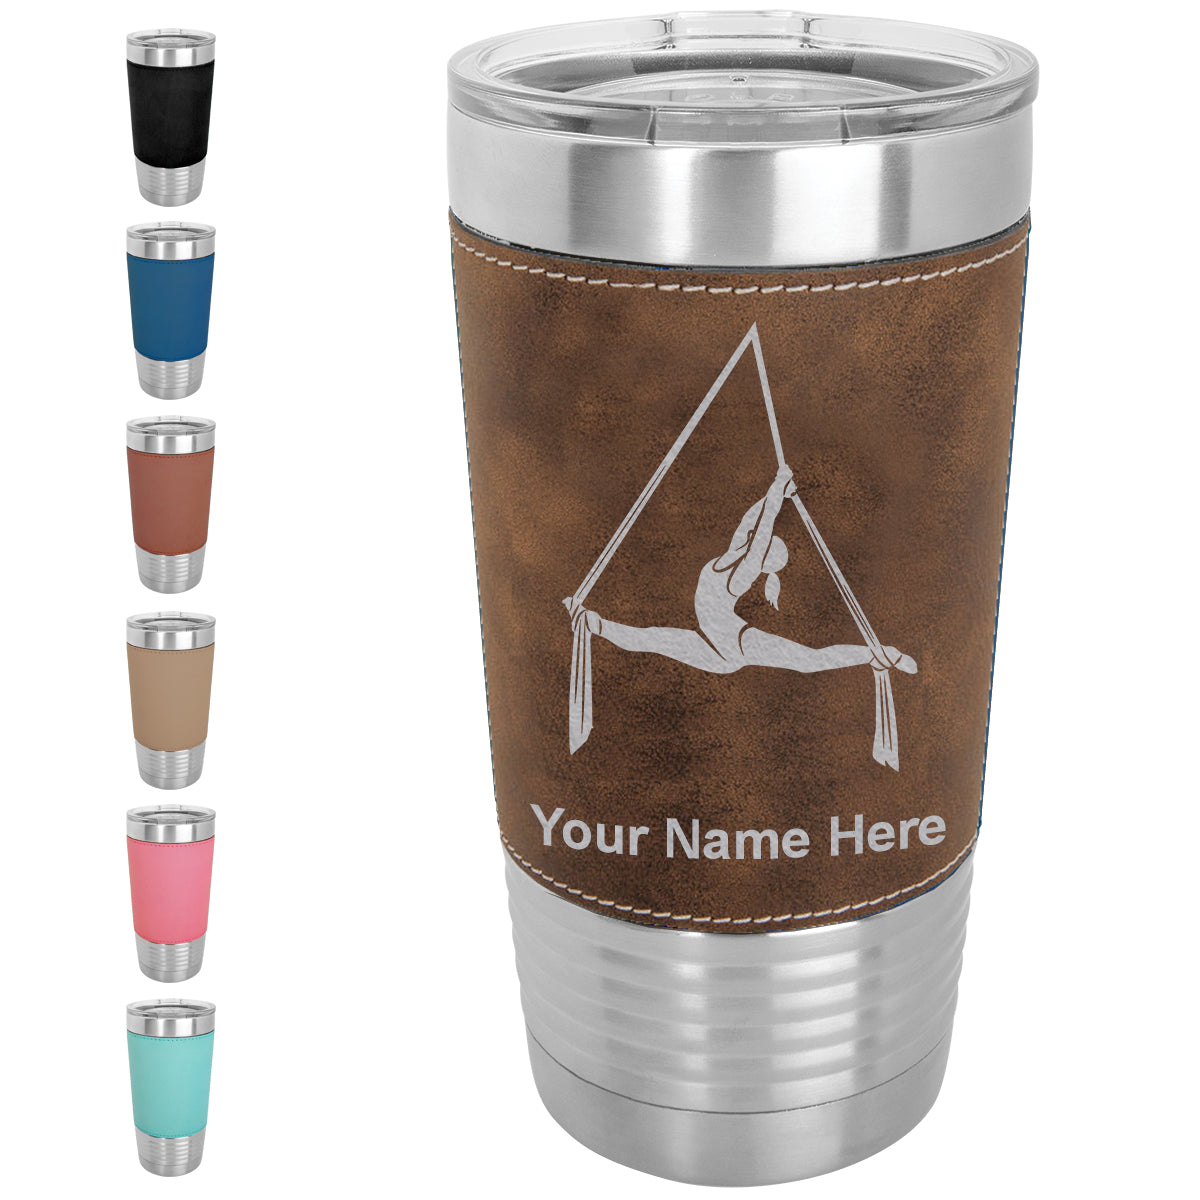 20oz Faux Leather Tumbler Mug, Aerial Silks, Personalized Engraving Included - LaserGram Custom Engraved Gifts